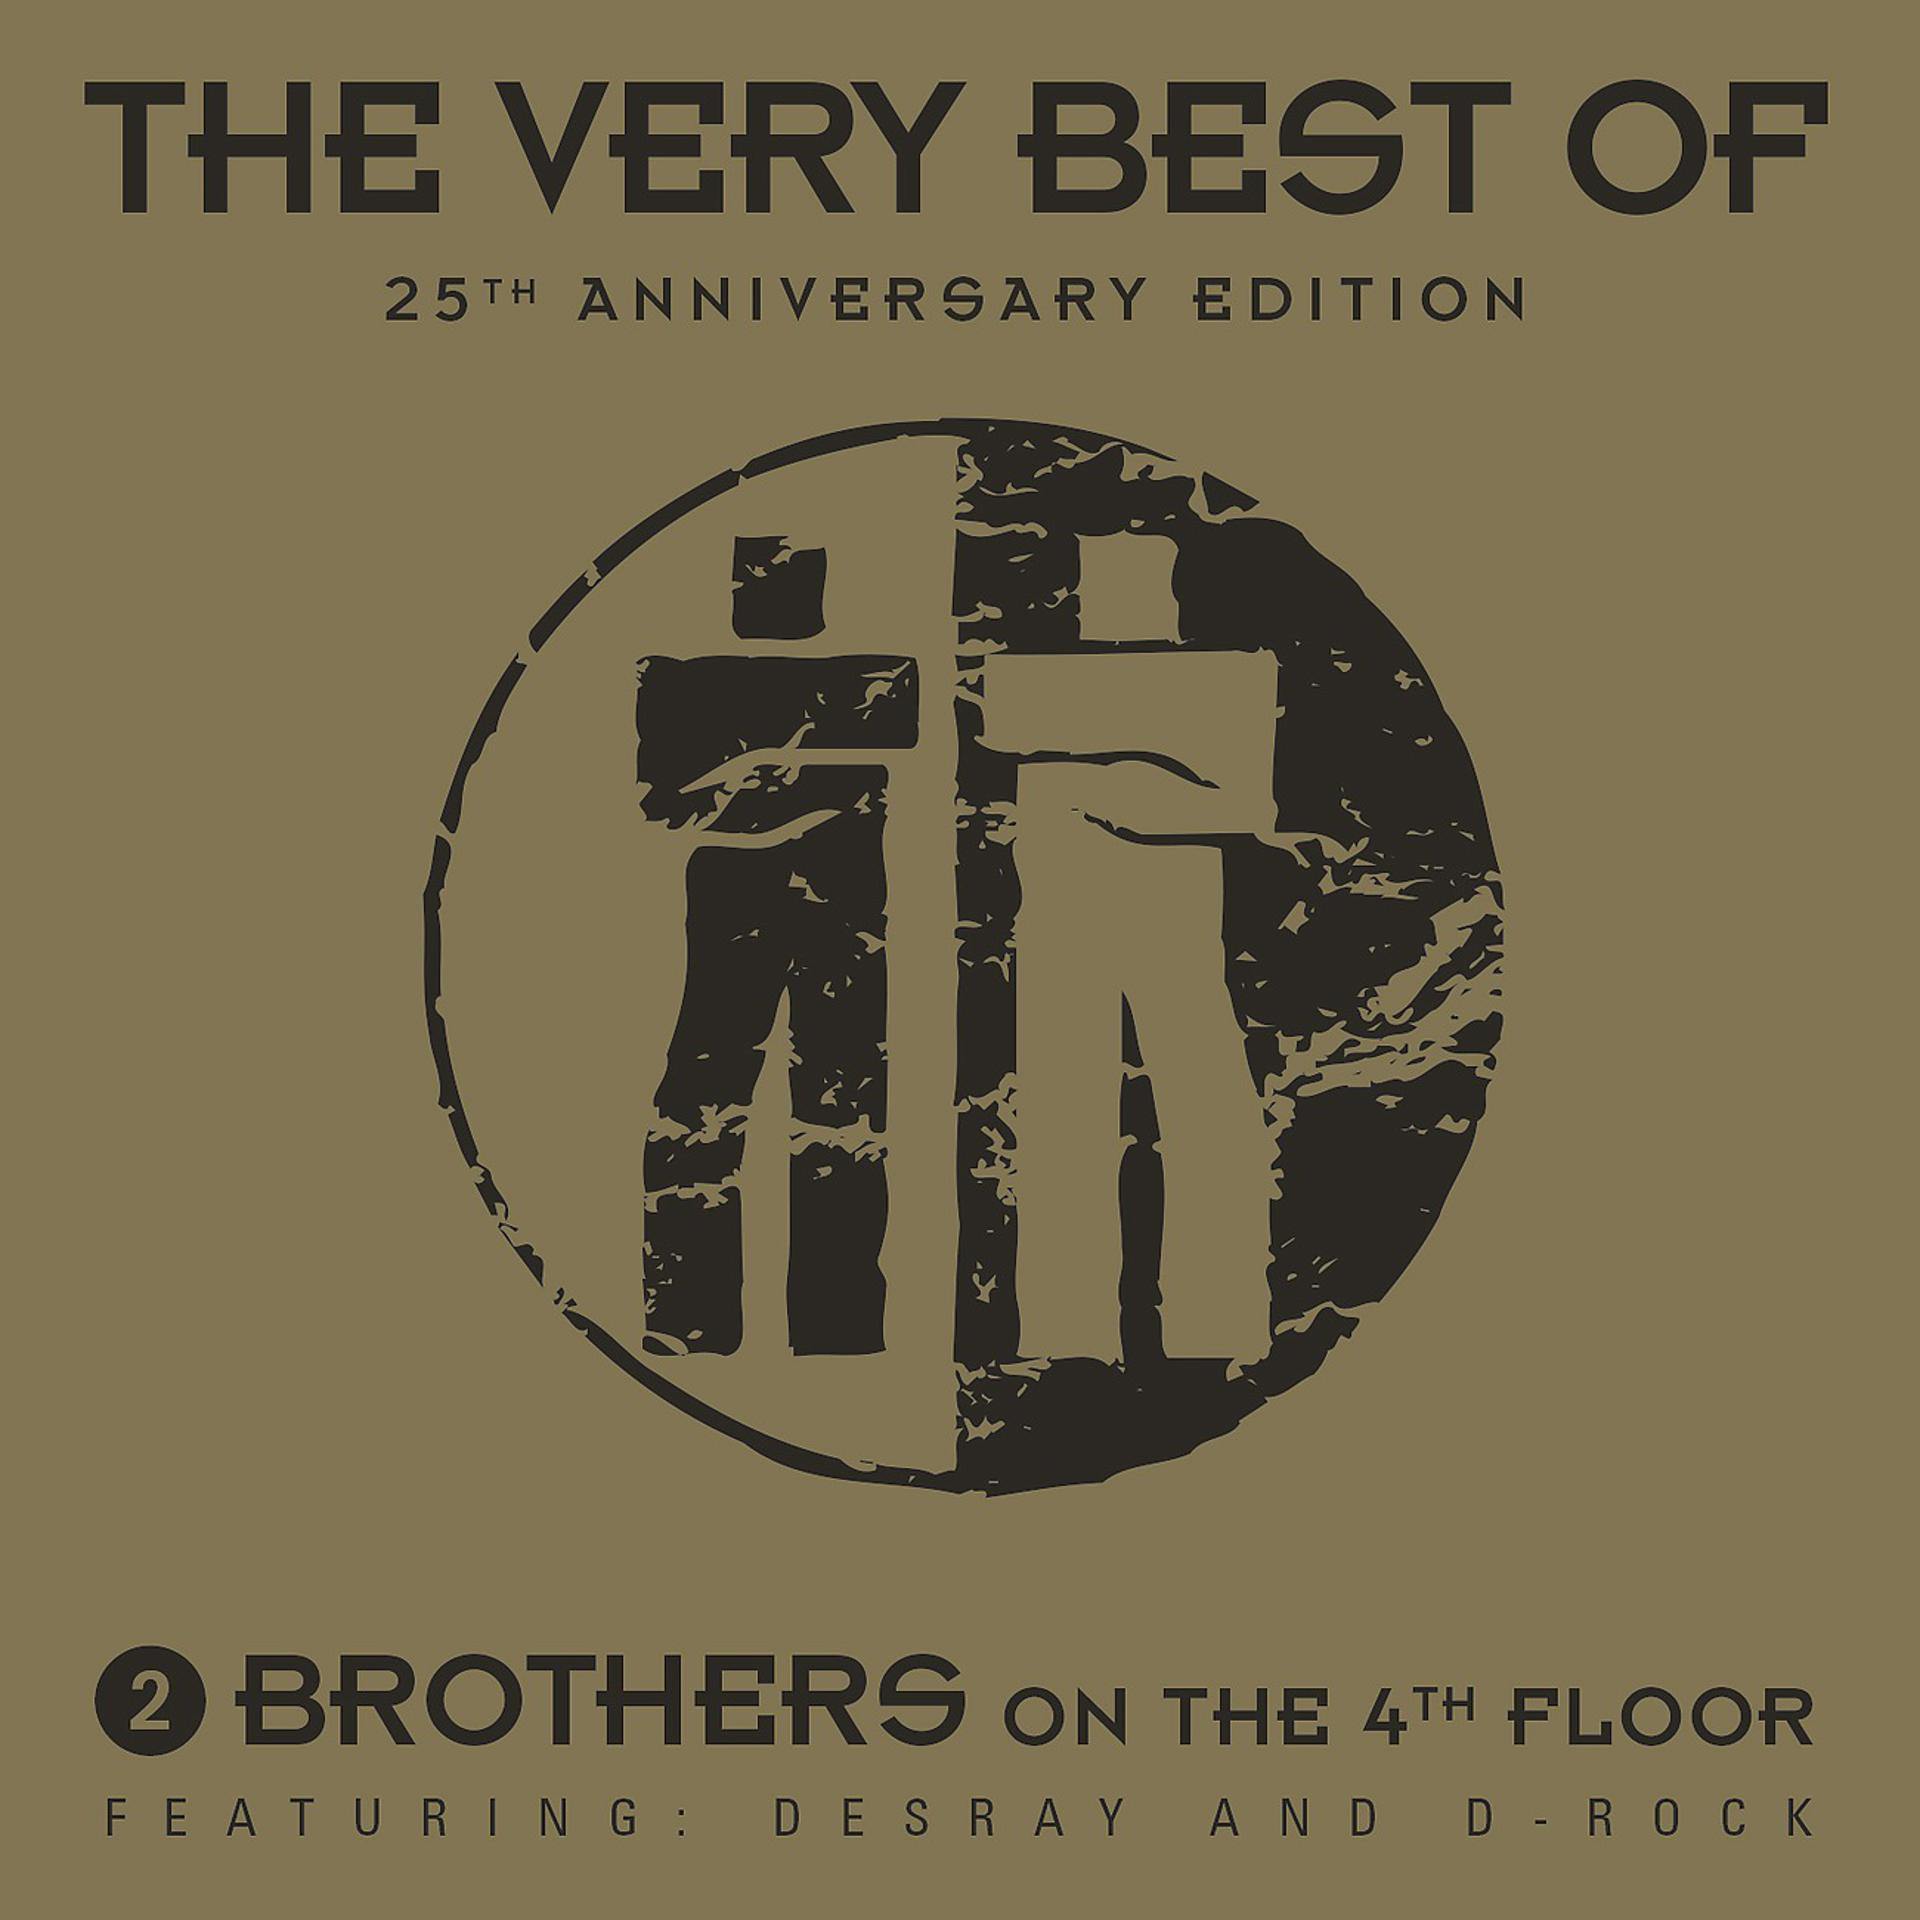 2 Brothers on the 4th Floor - 25th Anniversary the very best of. 2 Brothers on the 4th Floor. The very best of. 30th Anniversary. 2 Brothers on the 4th Floor солистка. 2 Brothers on the 4th Floor - 2 (1996). 2 brothers come take